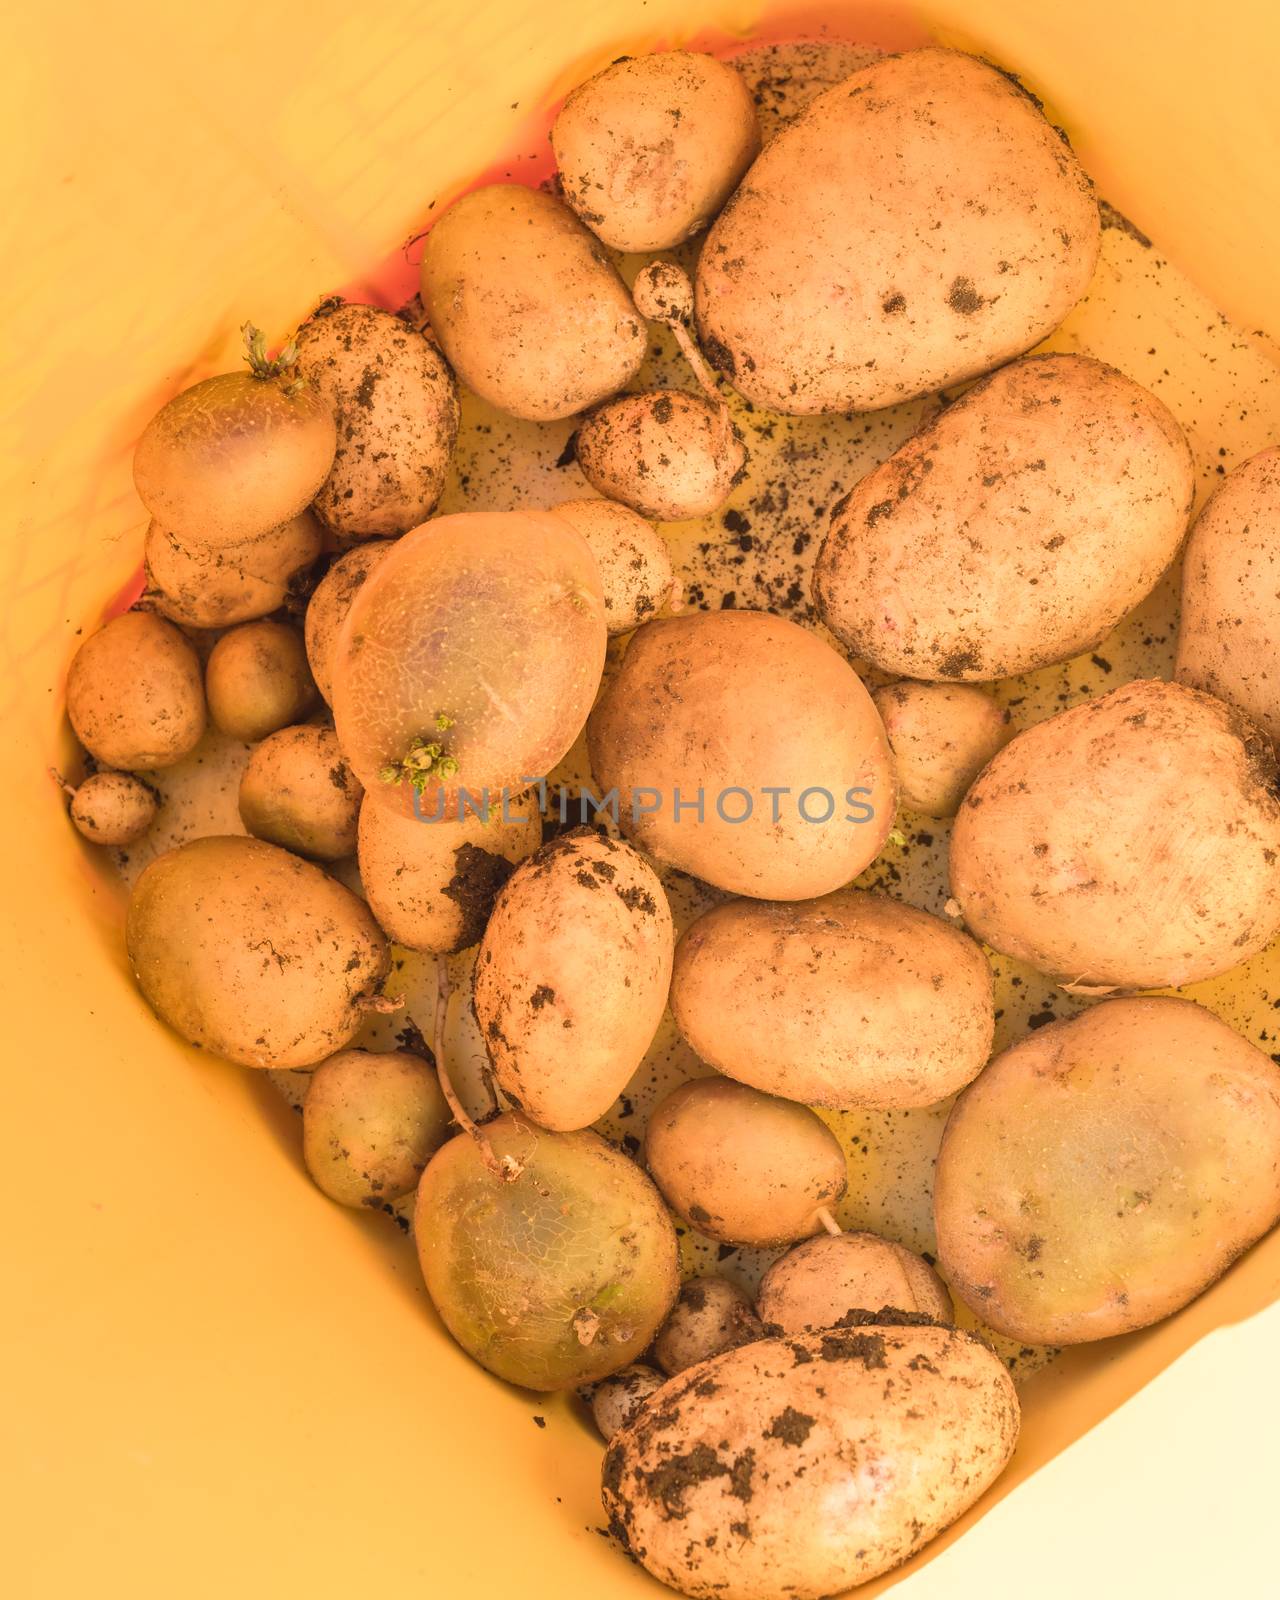 Plastic bucket with heap of harvested potatoes from patch garden in Texas, America. Fresh raw organic starchy crops with soil